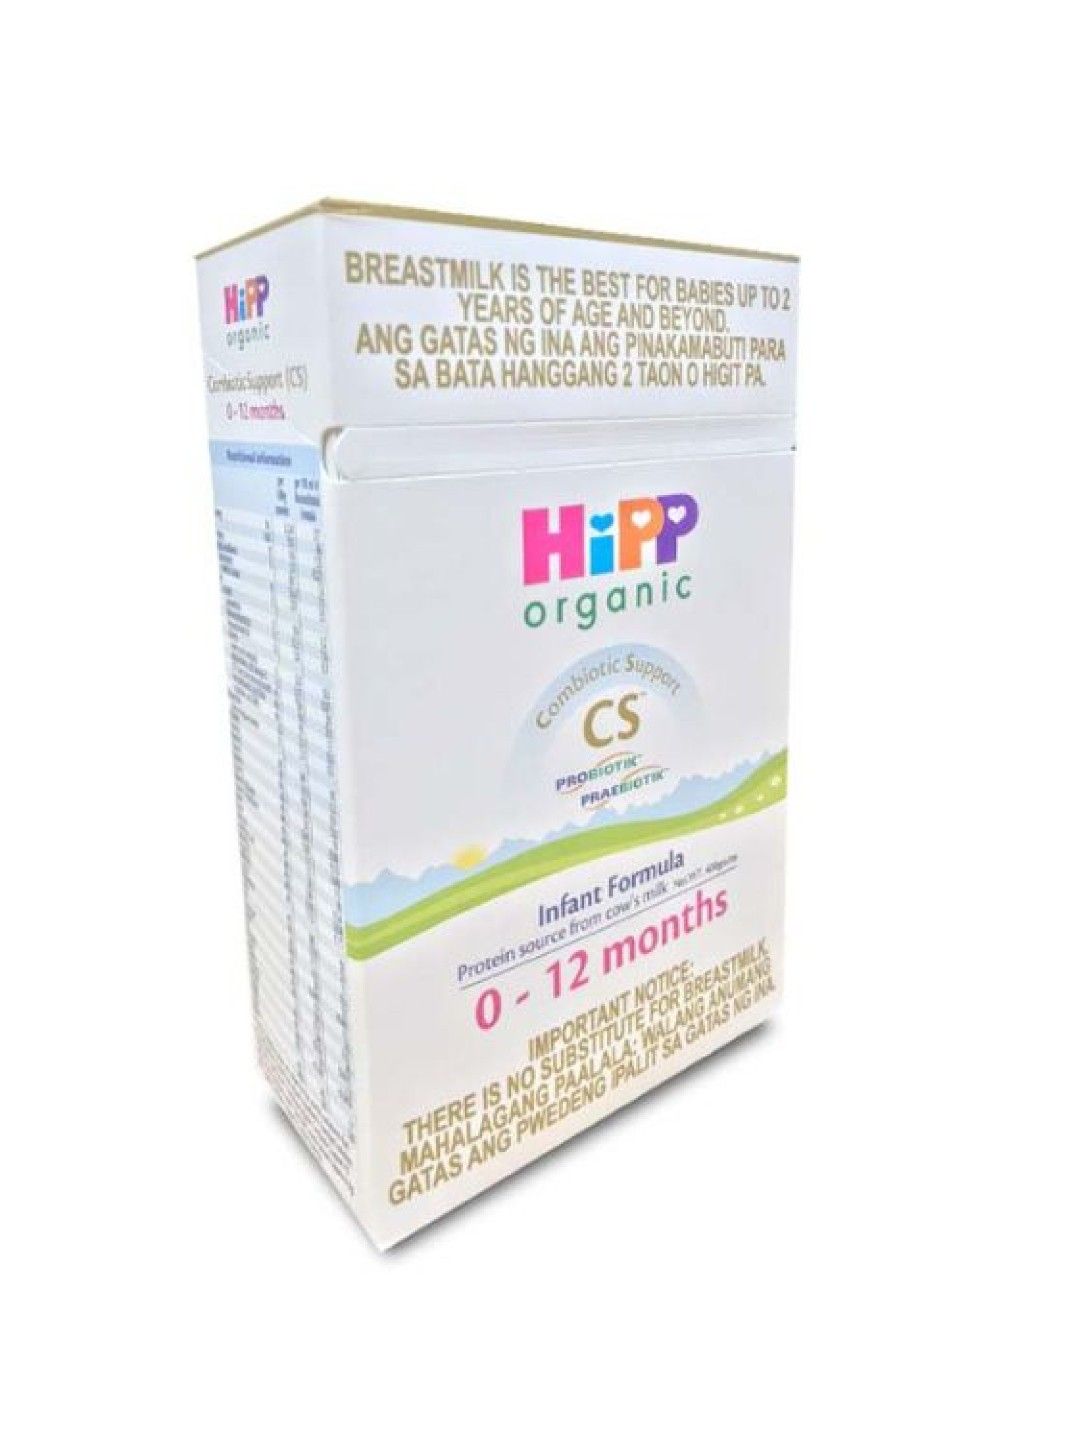 HiPP Organic Combiotic Support Bag-in-Boxes Infant Formula 0-12 Months (400g)